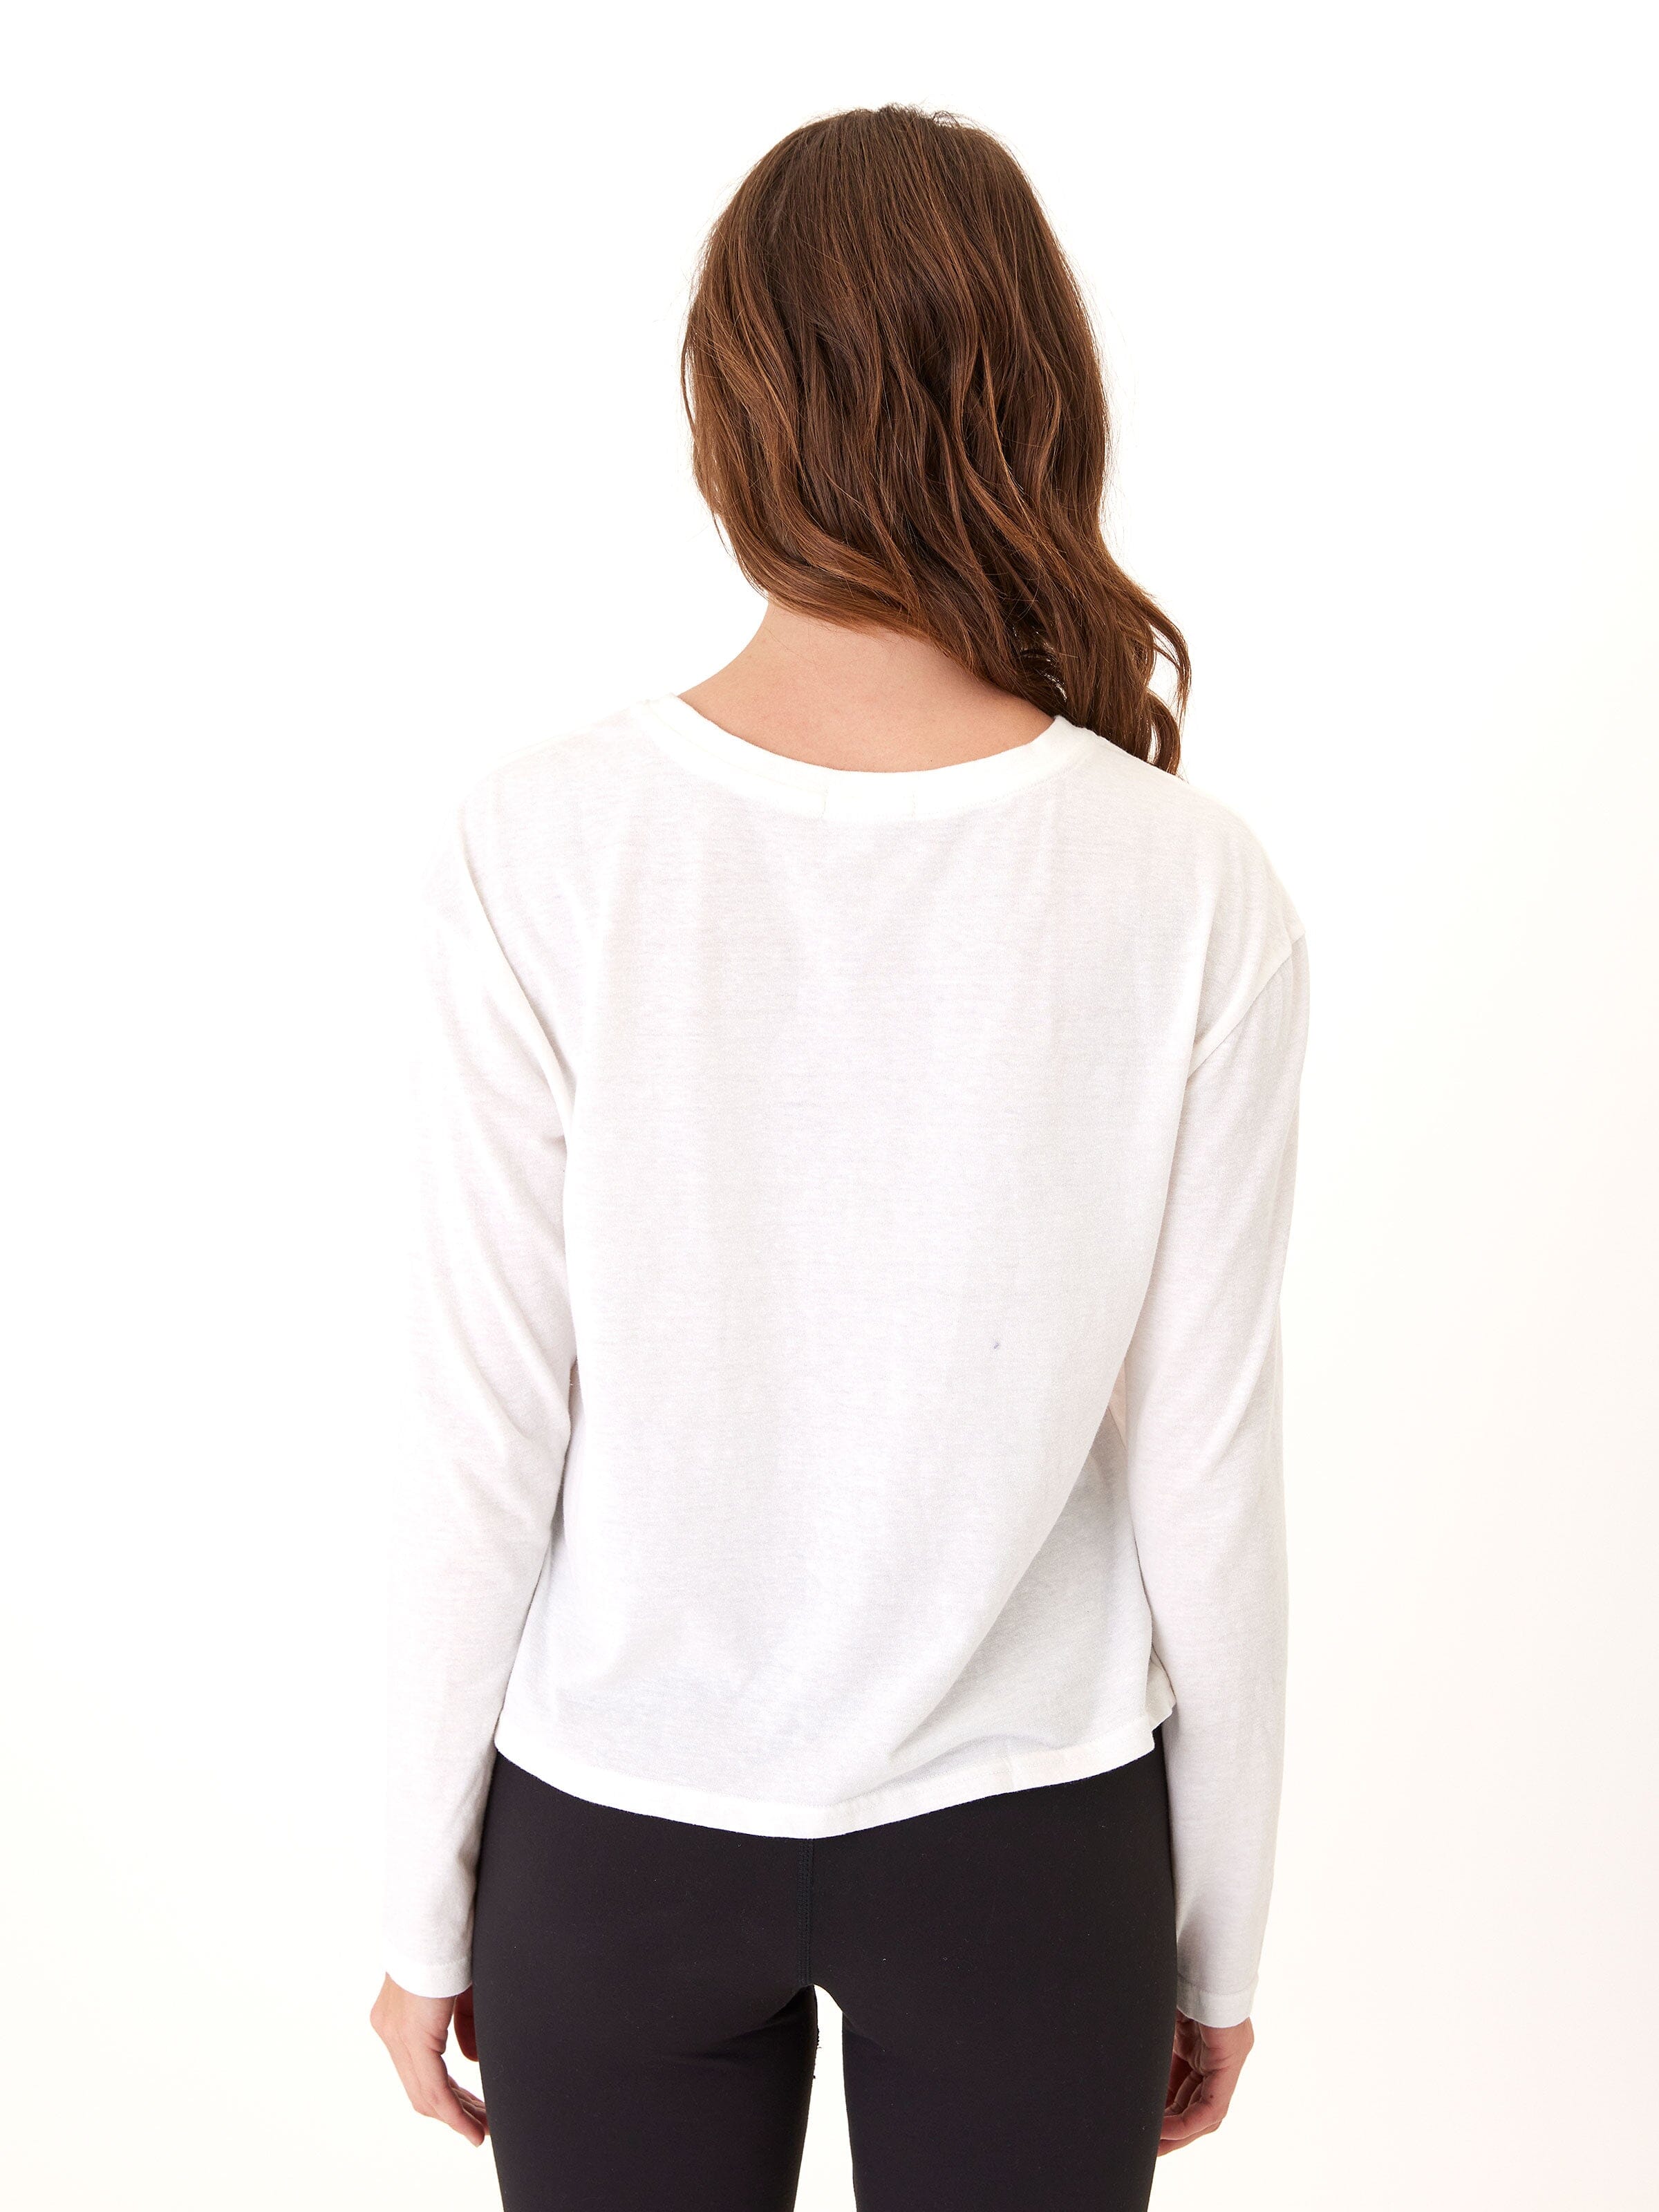 Women's Long Sleeves – Threads 4 Thought